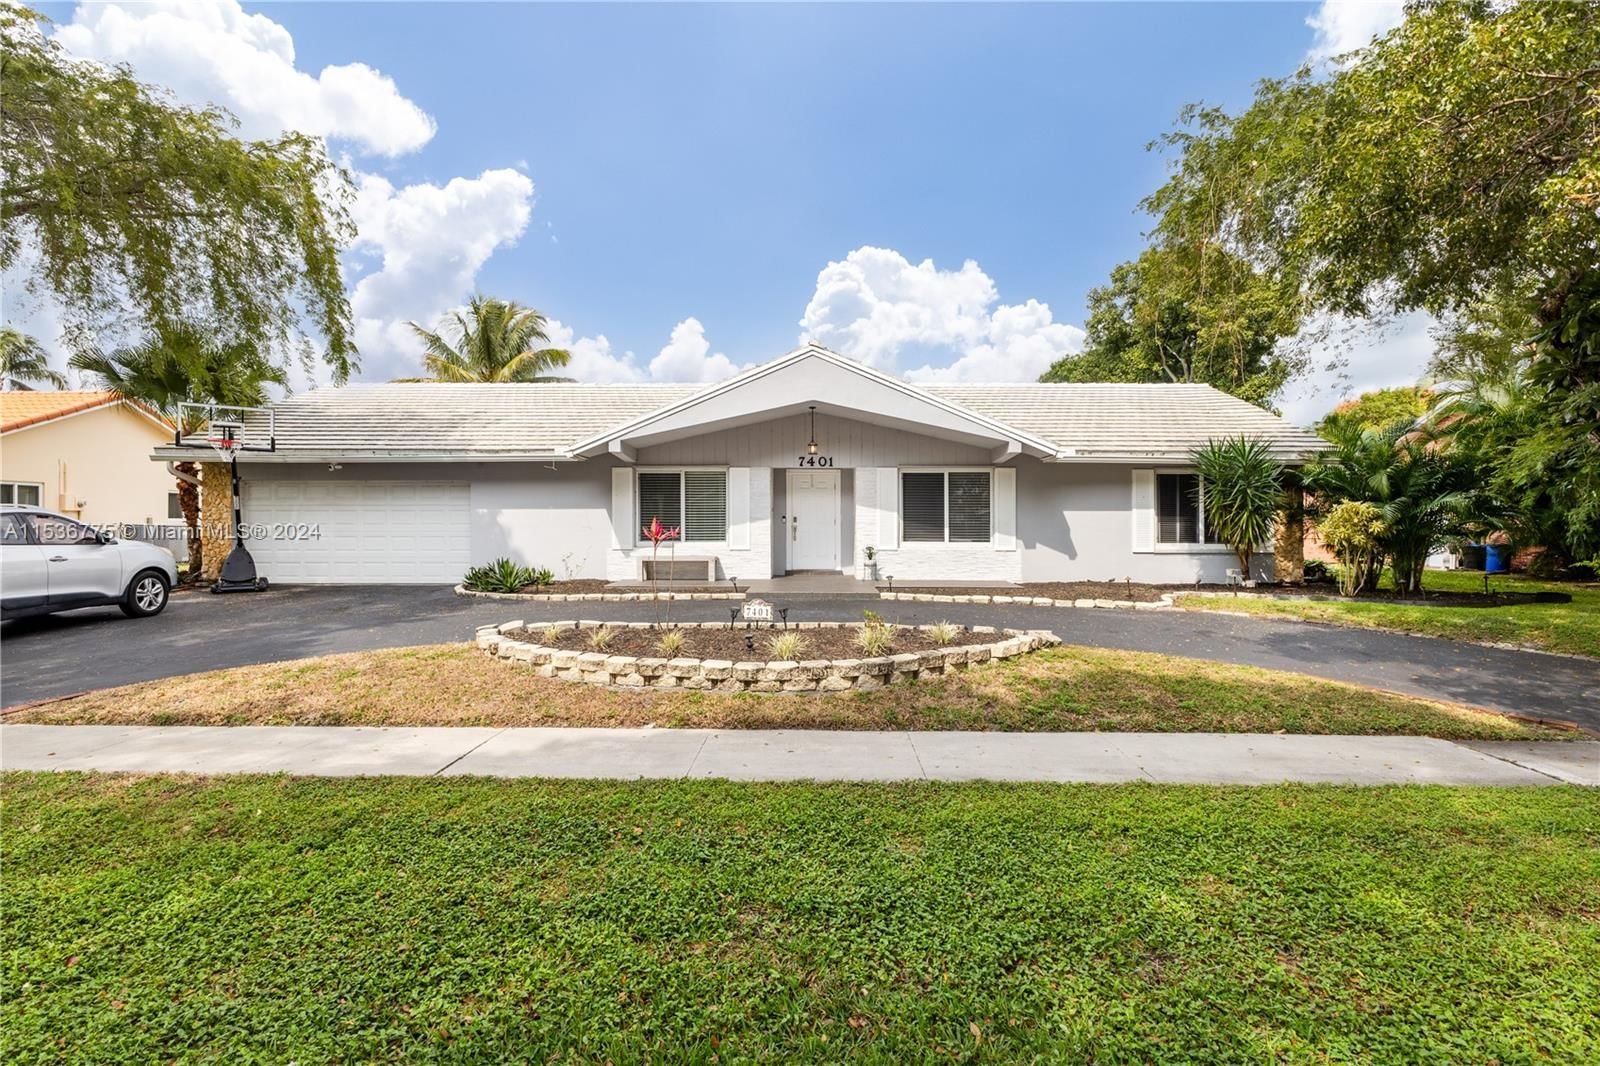 Real estate property located at 7401 18th St, Broward County, NEW ORLEANS VILLAS, Plantation, FL